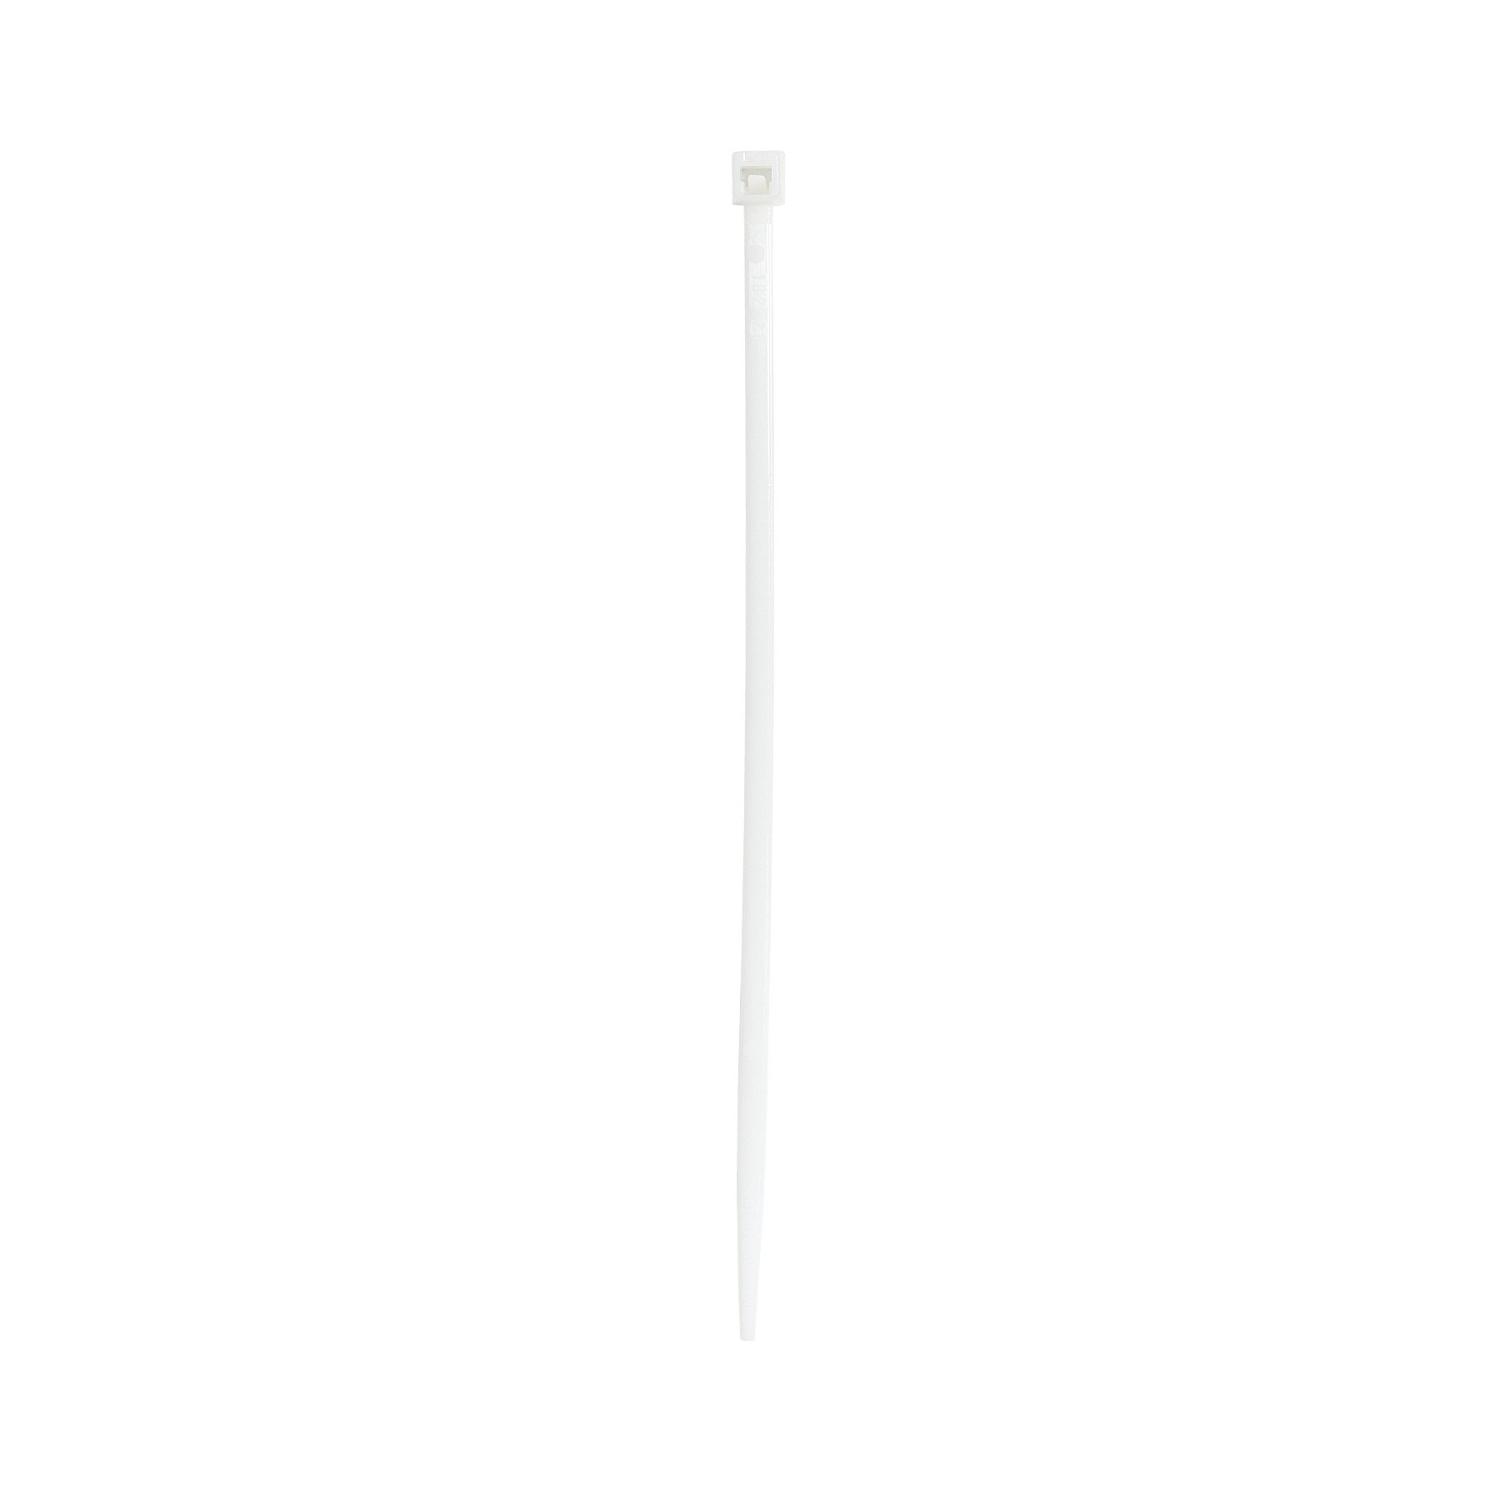 Thomas & Betts TY100-18 Catamount Cable Tie